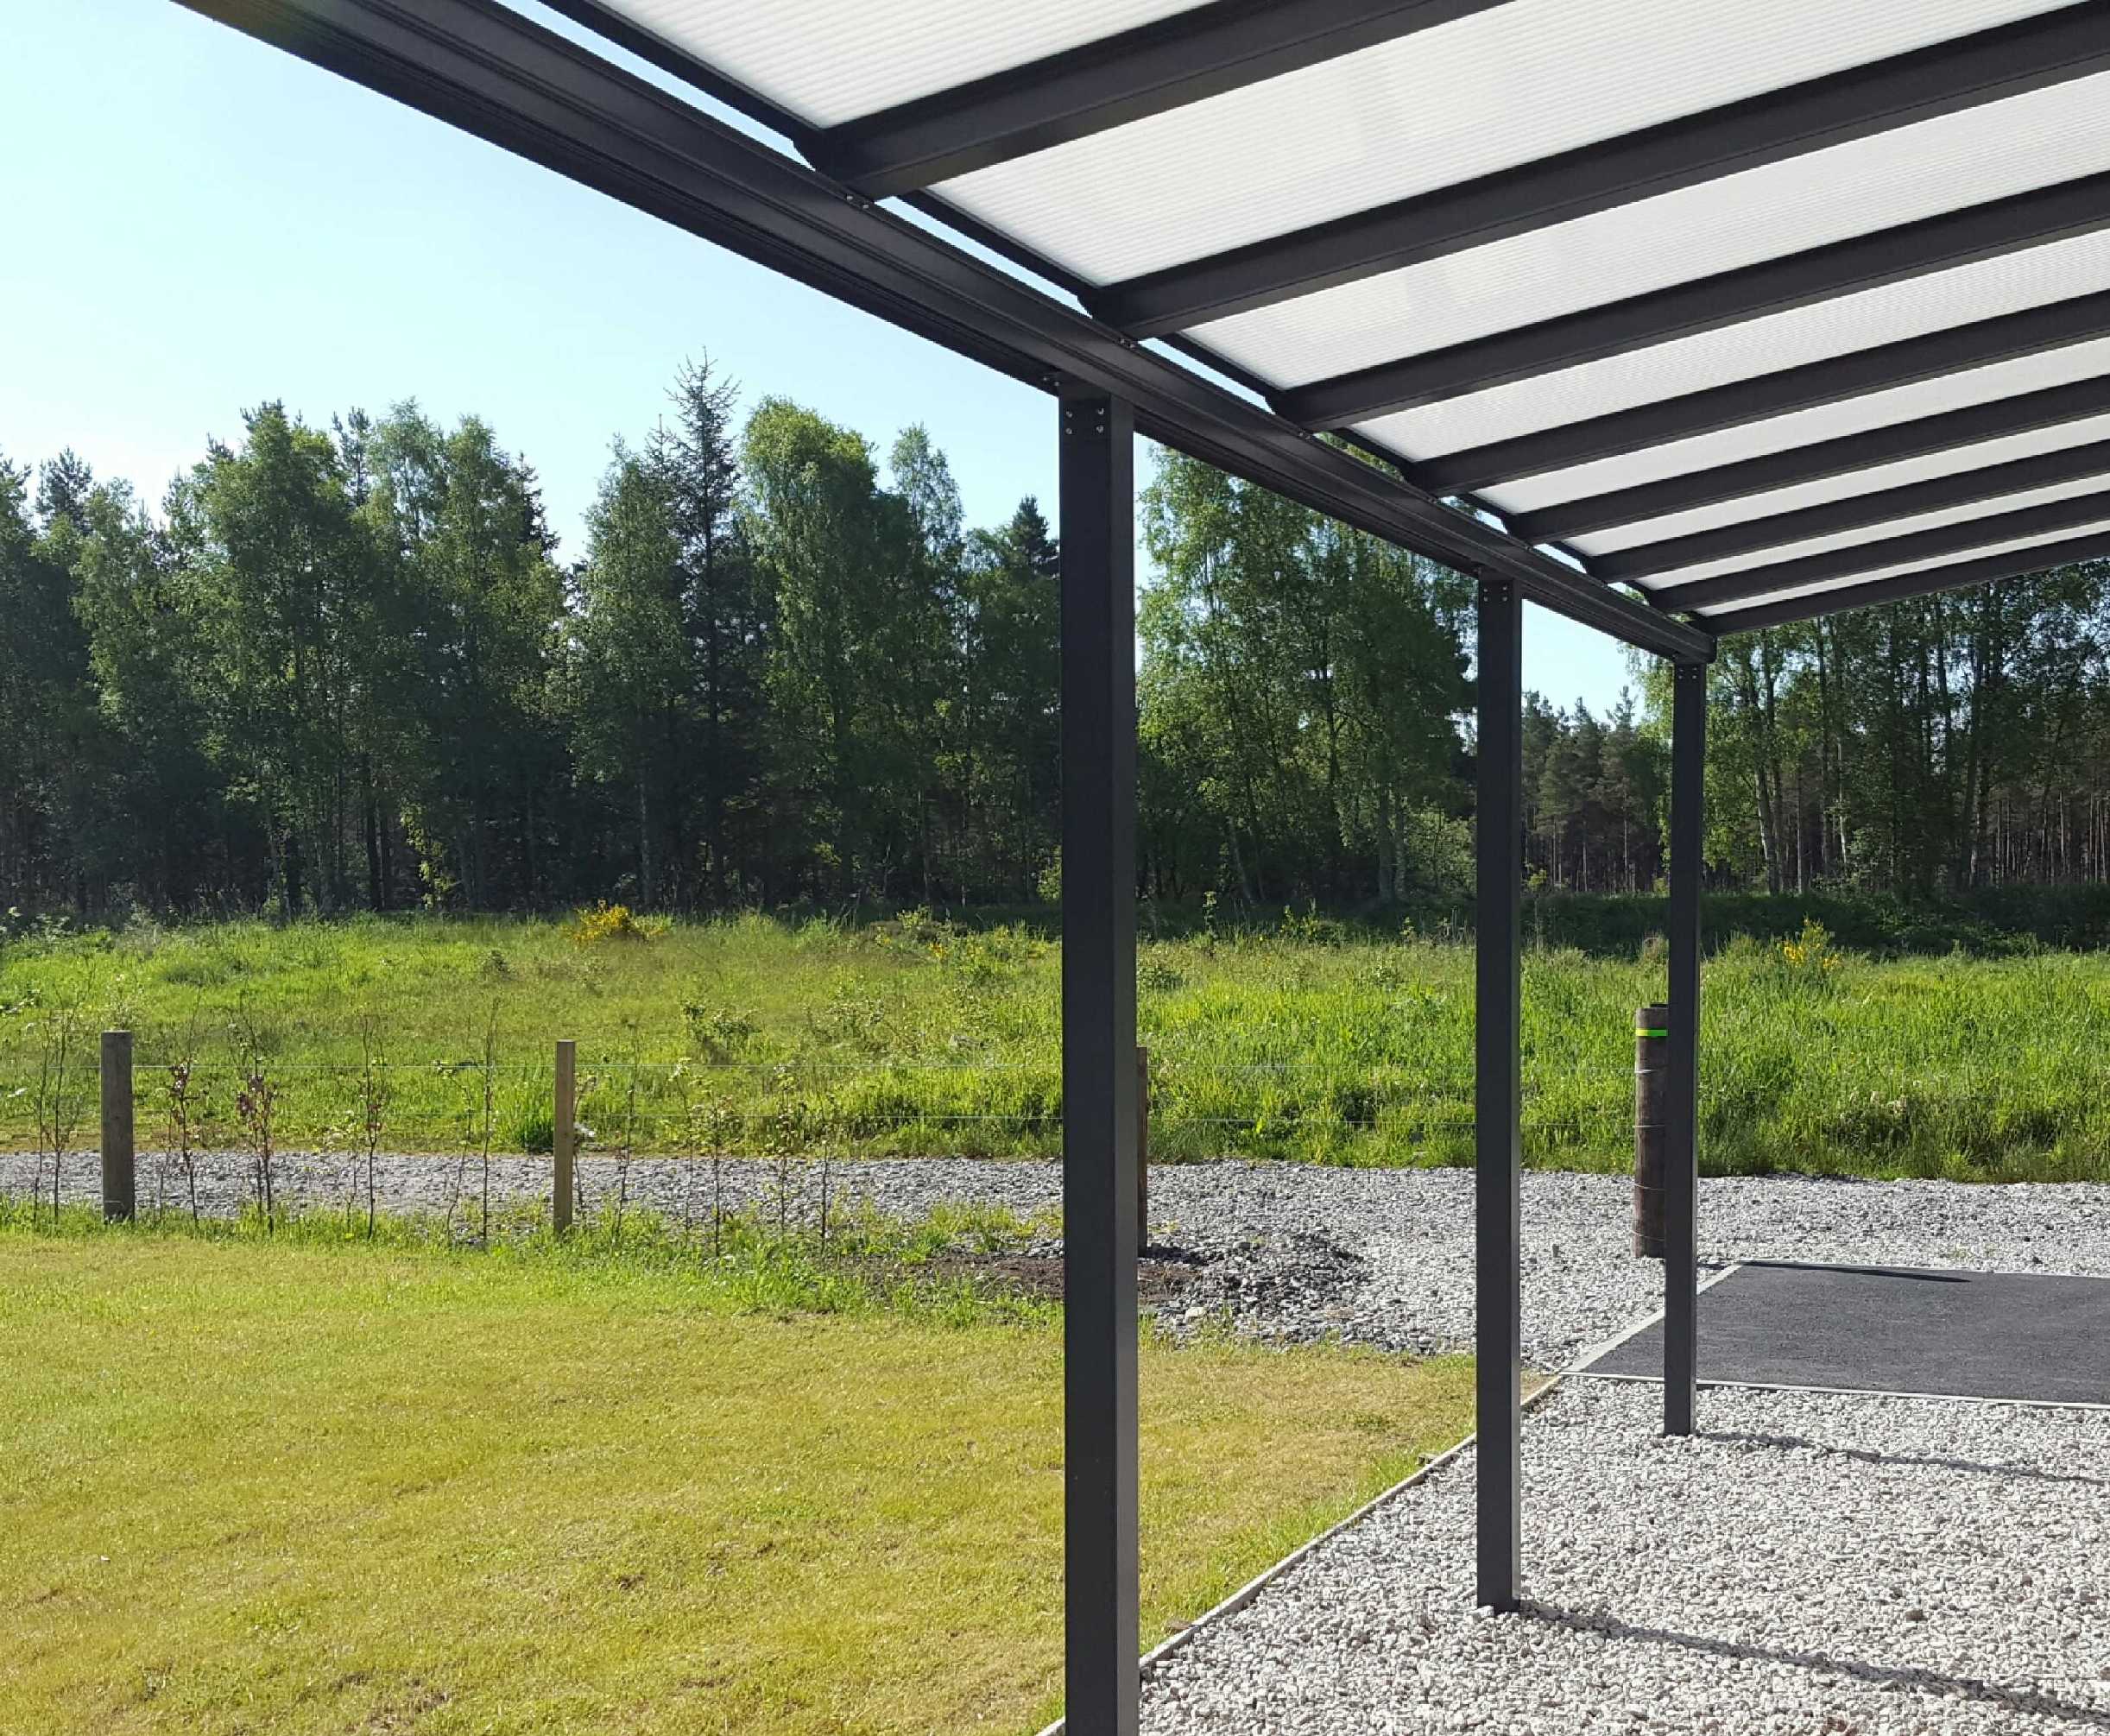 Omega Smart Lean-To Canopy, Anthracite Grey, UNGLAZED for 6mm Glazing - 2.8m (W) x 2.0m (P), (2) Supporting Posts